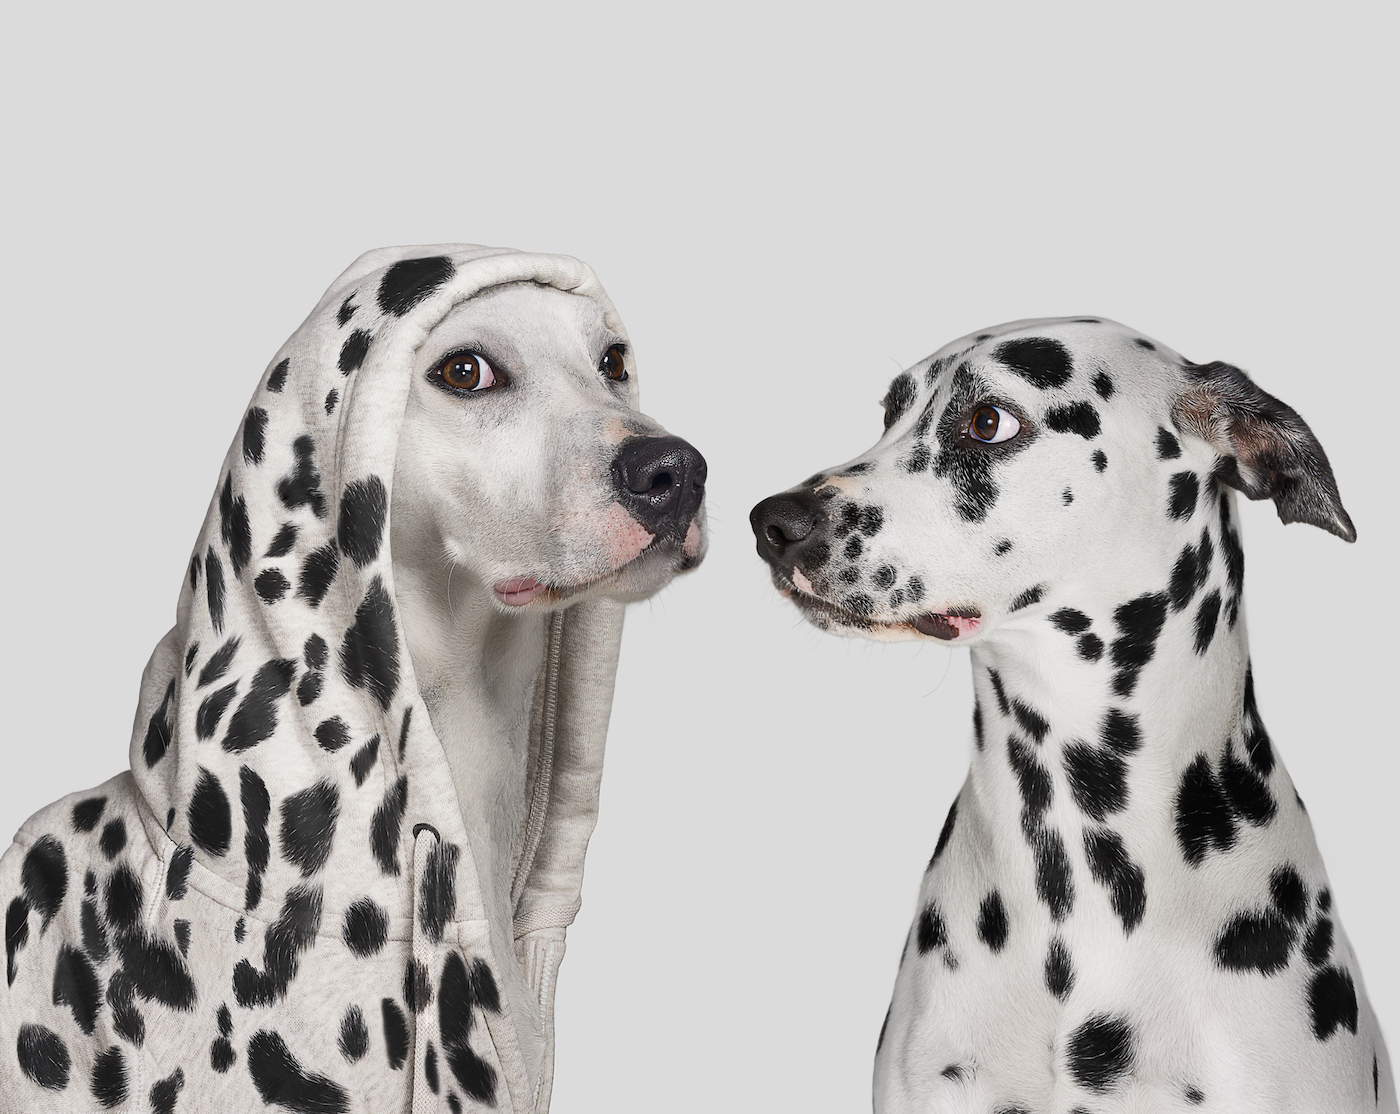 Dalmatian dog started by white dog wearing hoodie with with spots, pretending to be a Dalmatian